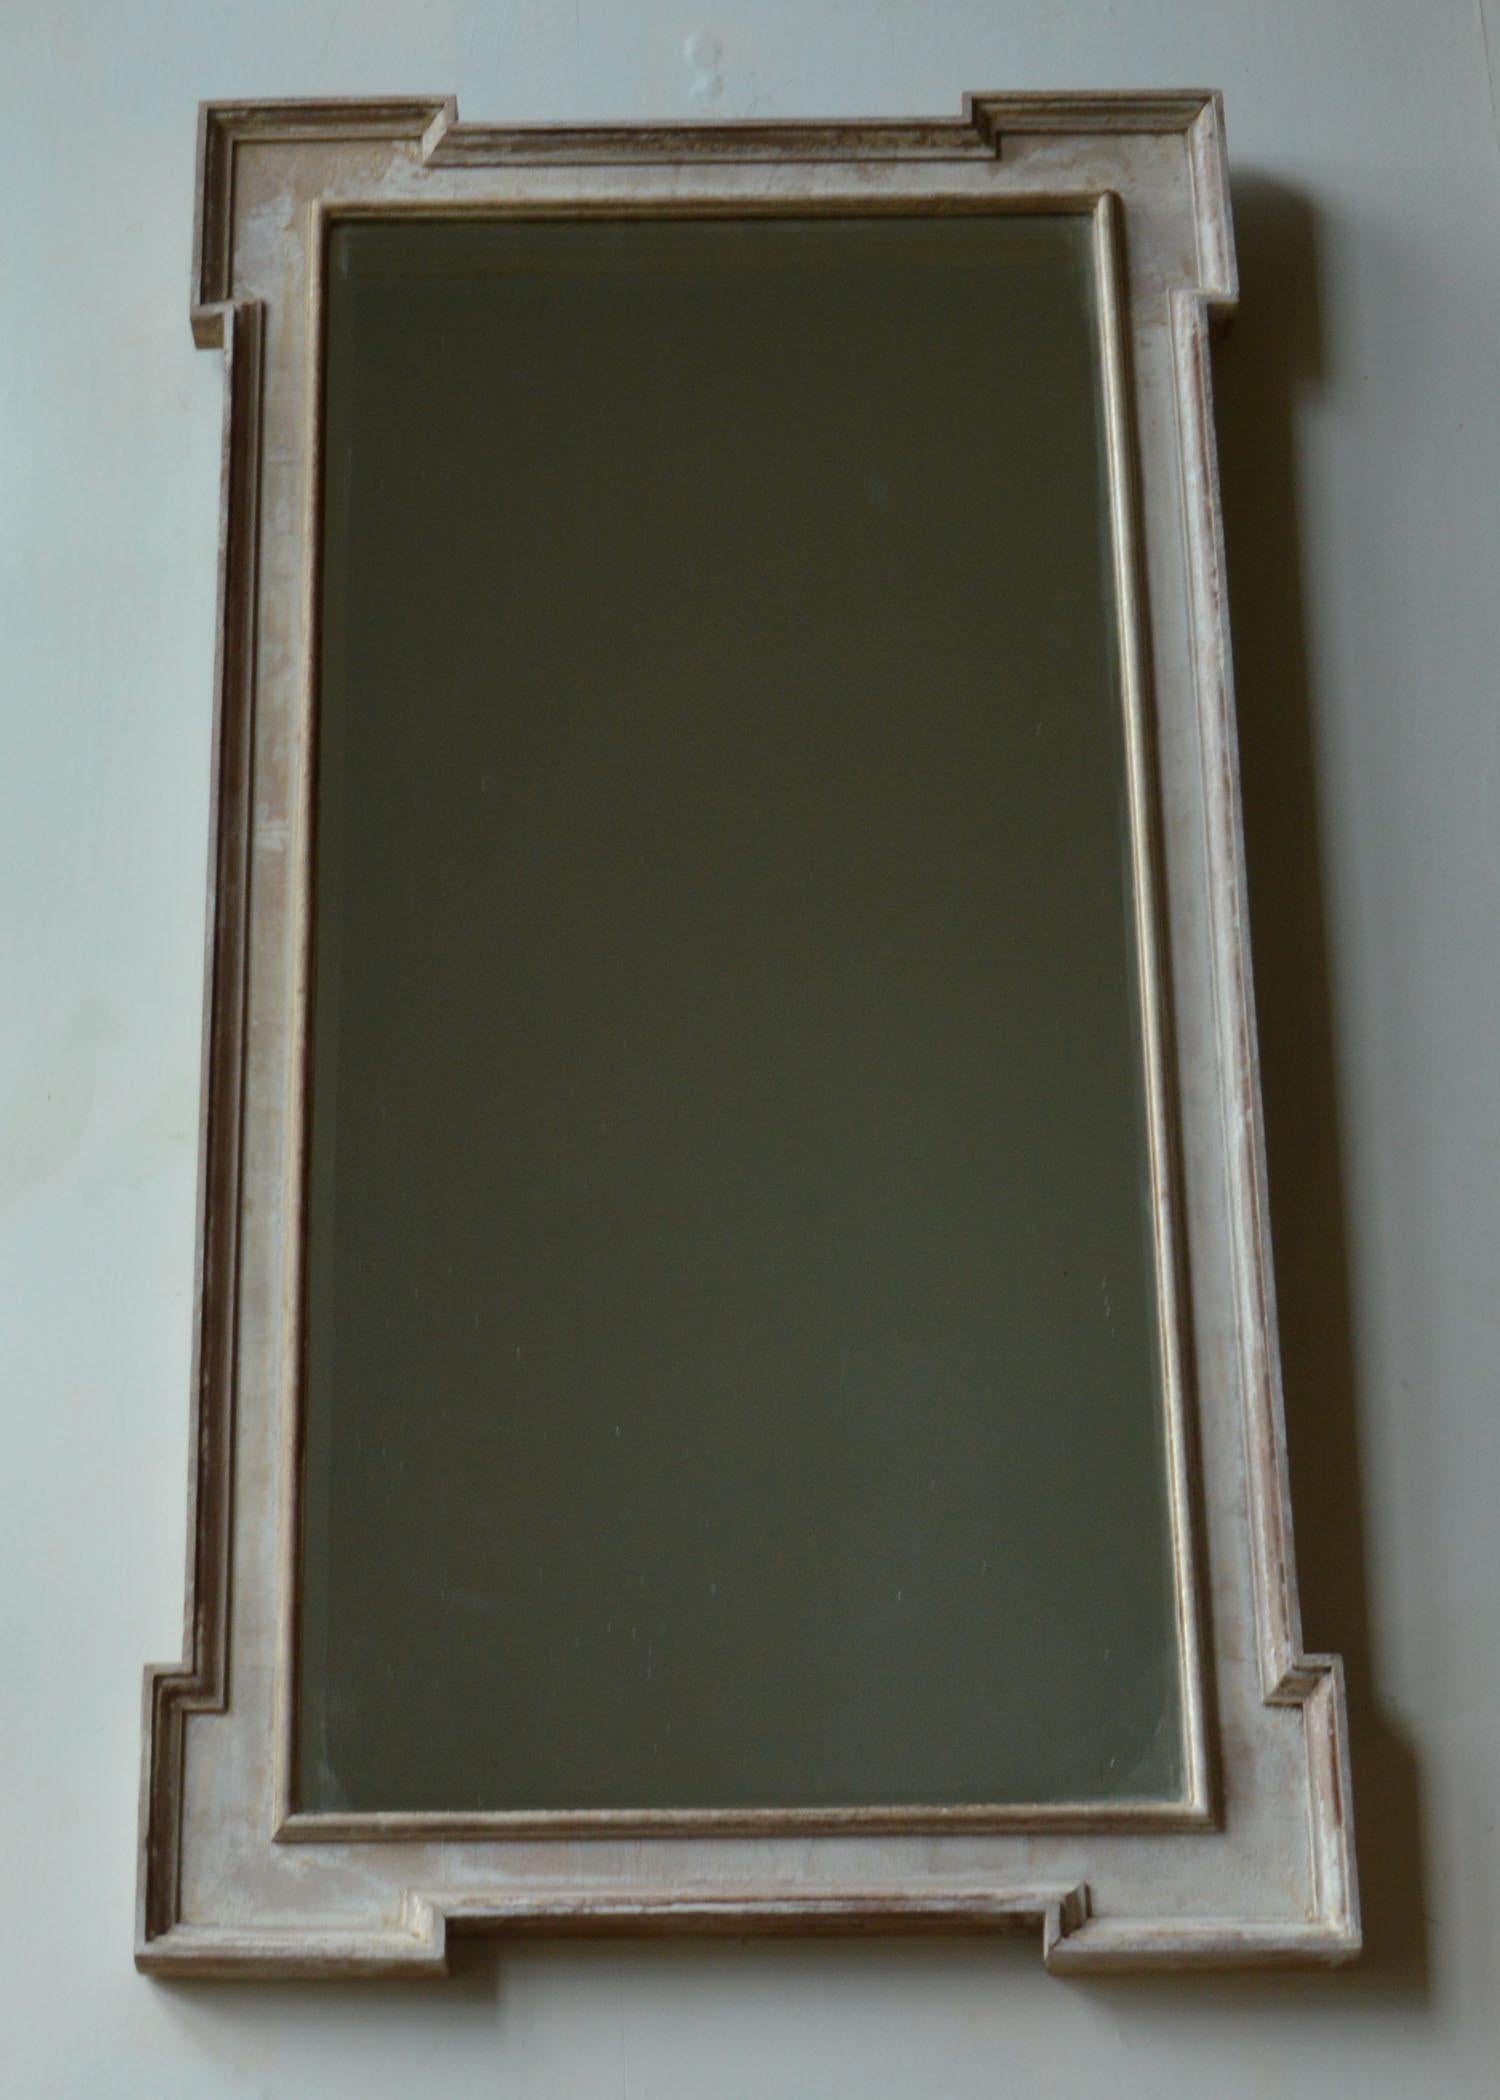 Elegant Georgian style pier glass or wall mirror

Bleached mahogany. A very appealing distressed look.

Original beveled glass showing signs of minor foxing.

 